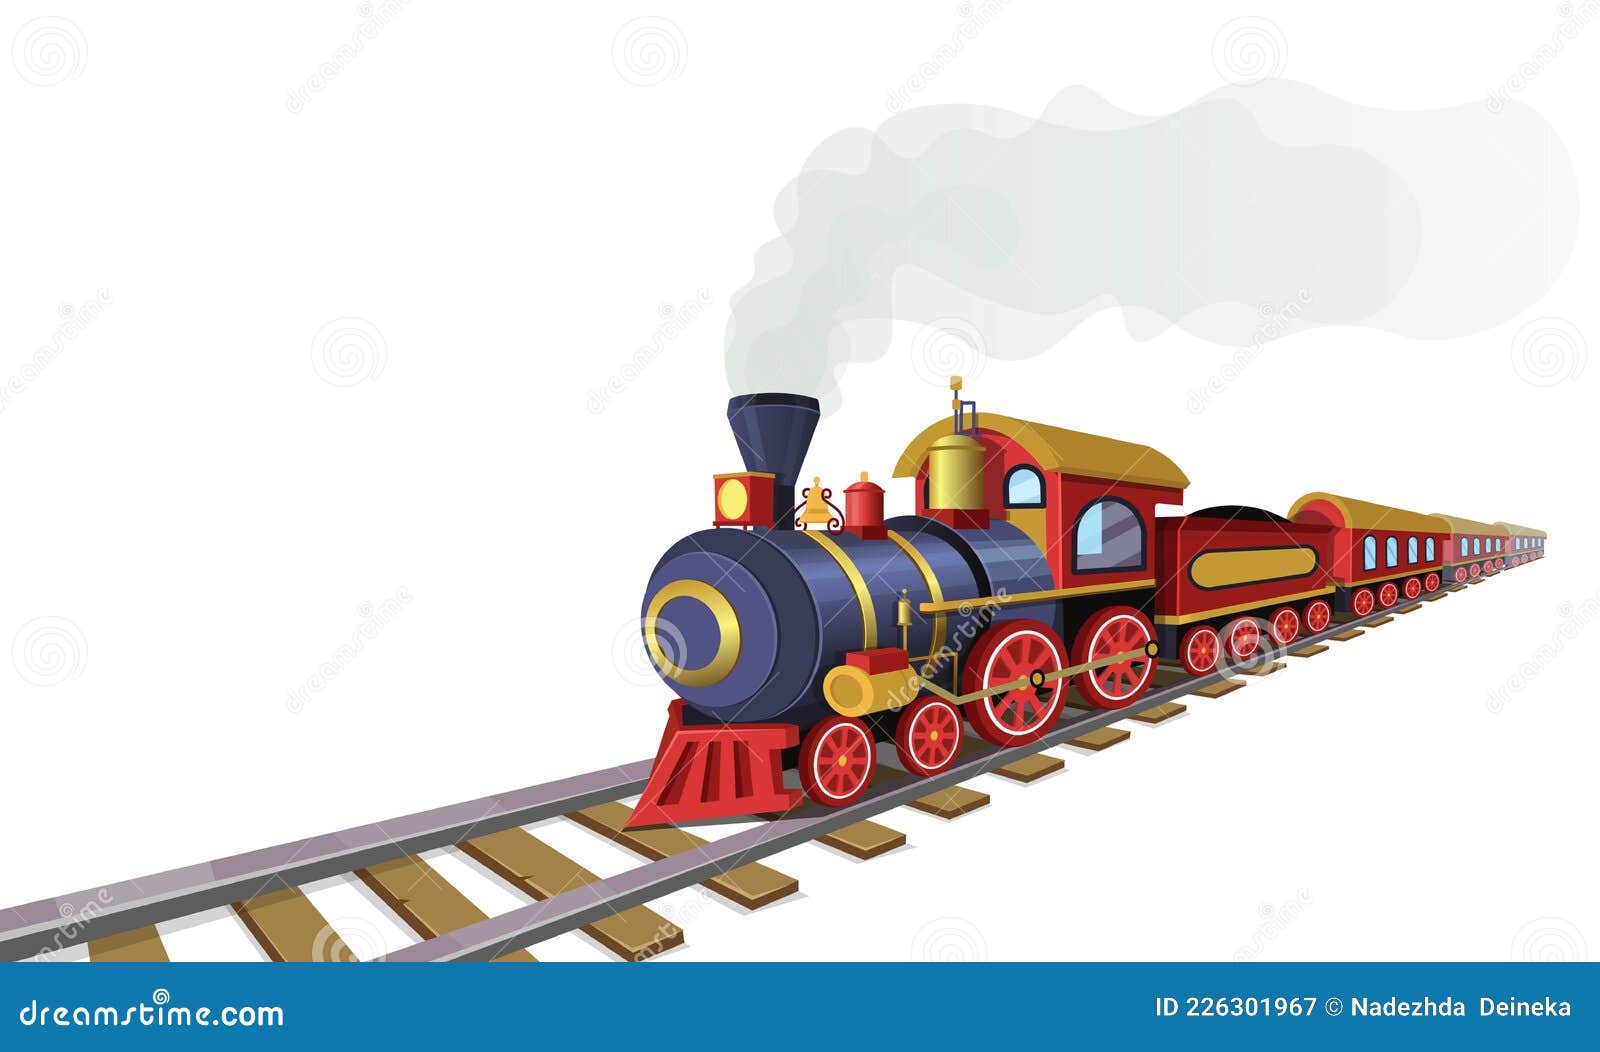 Old Train with Railway Station in the  Cartoon Illustration  Stock Vector - Illustration of station, farming: 226301967